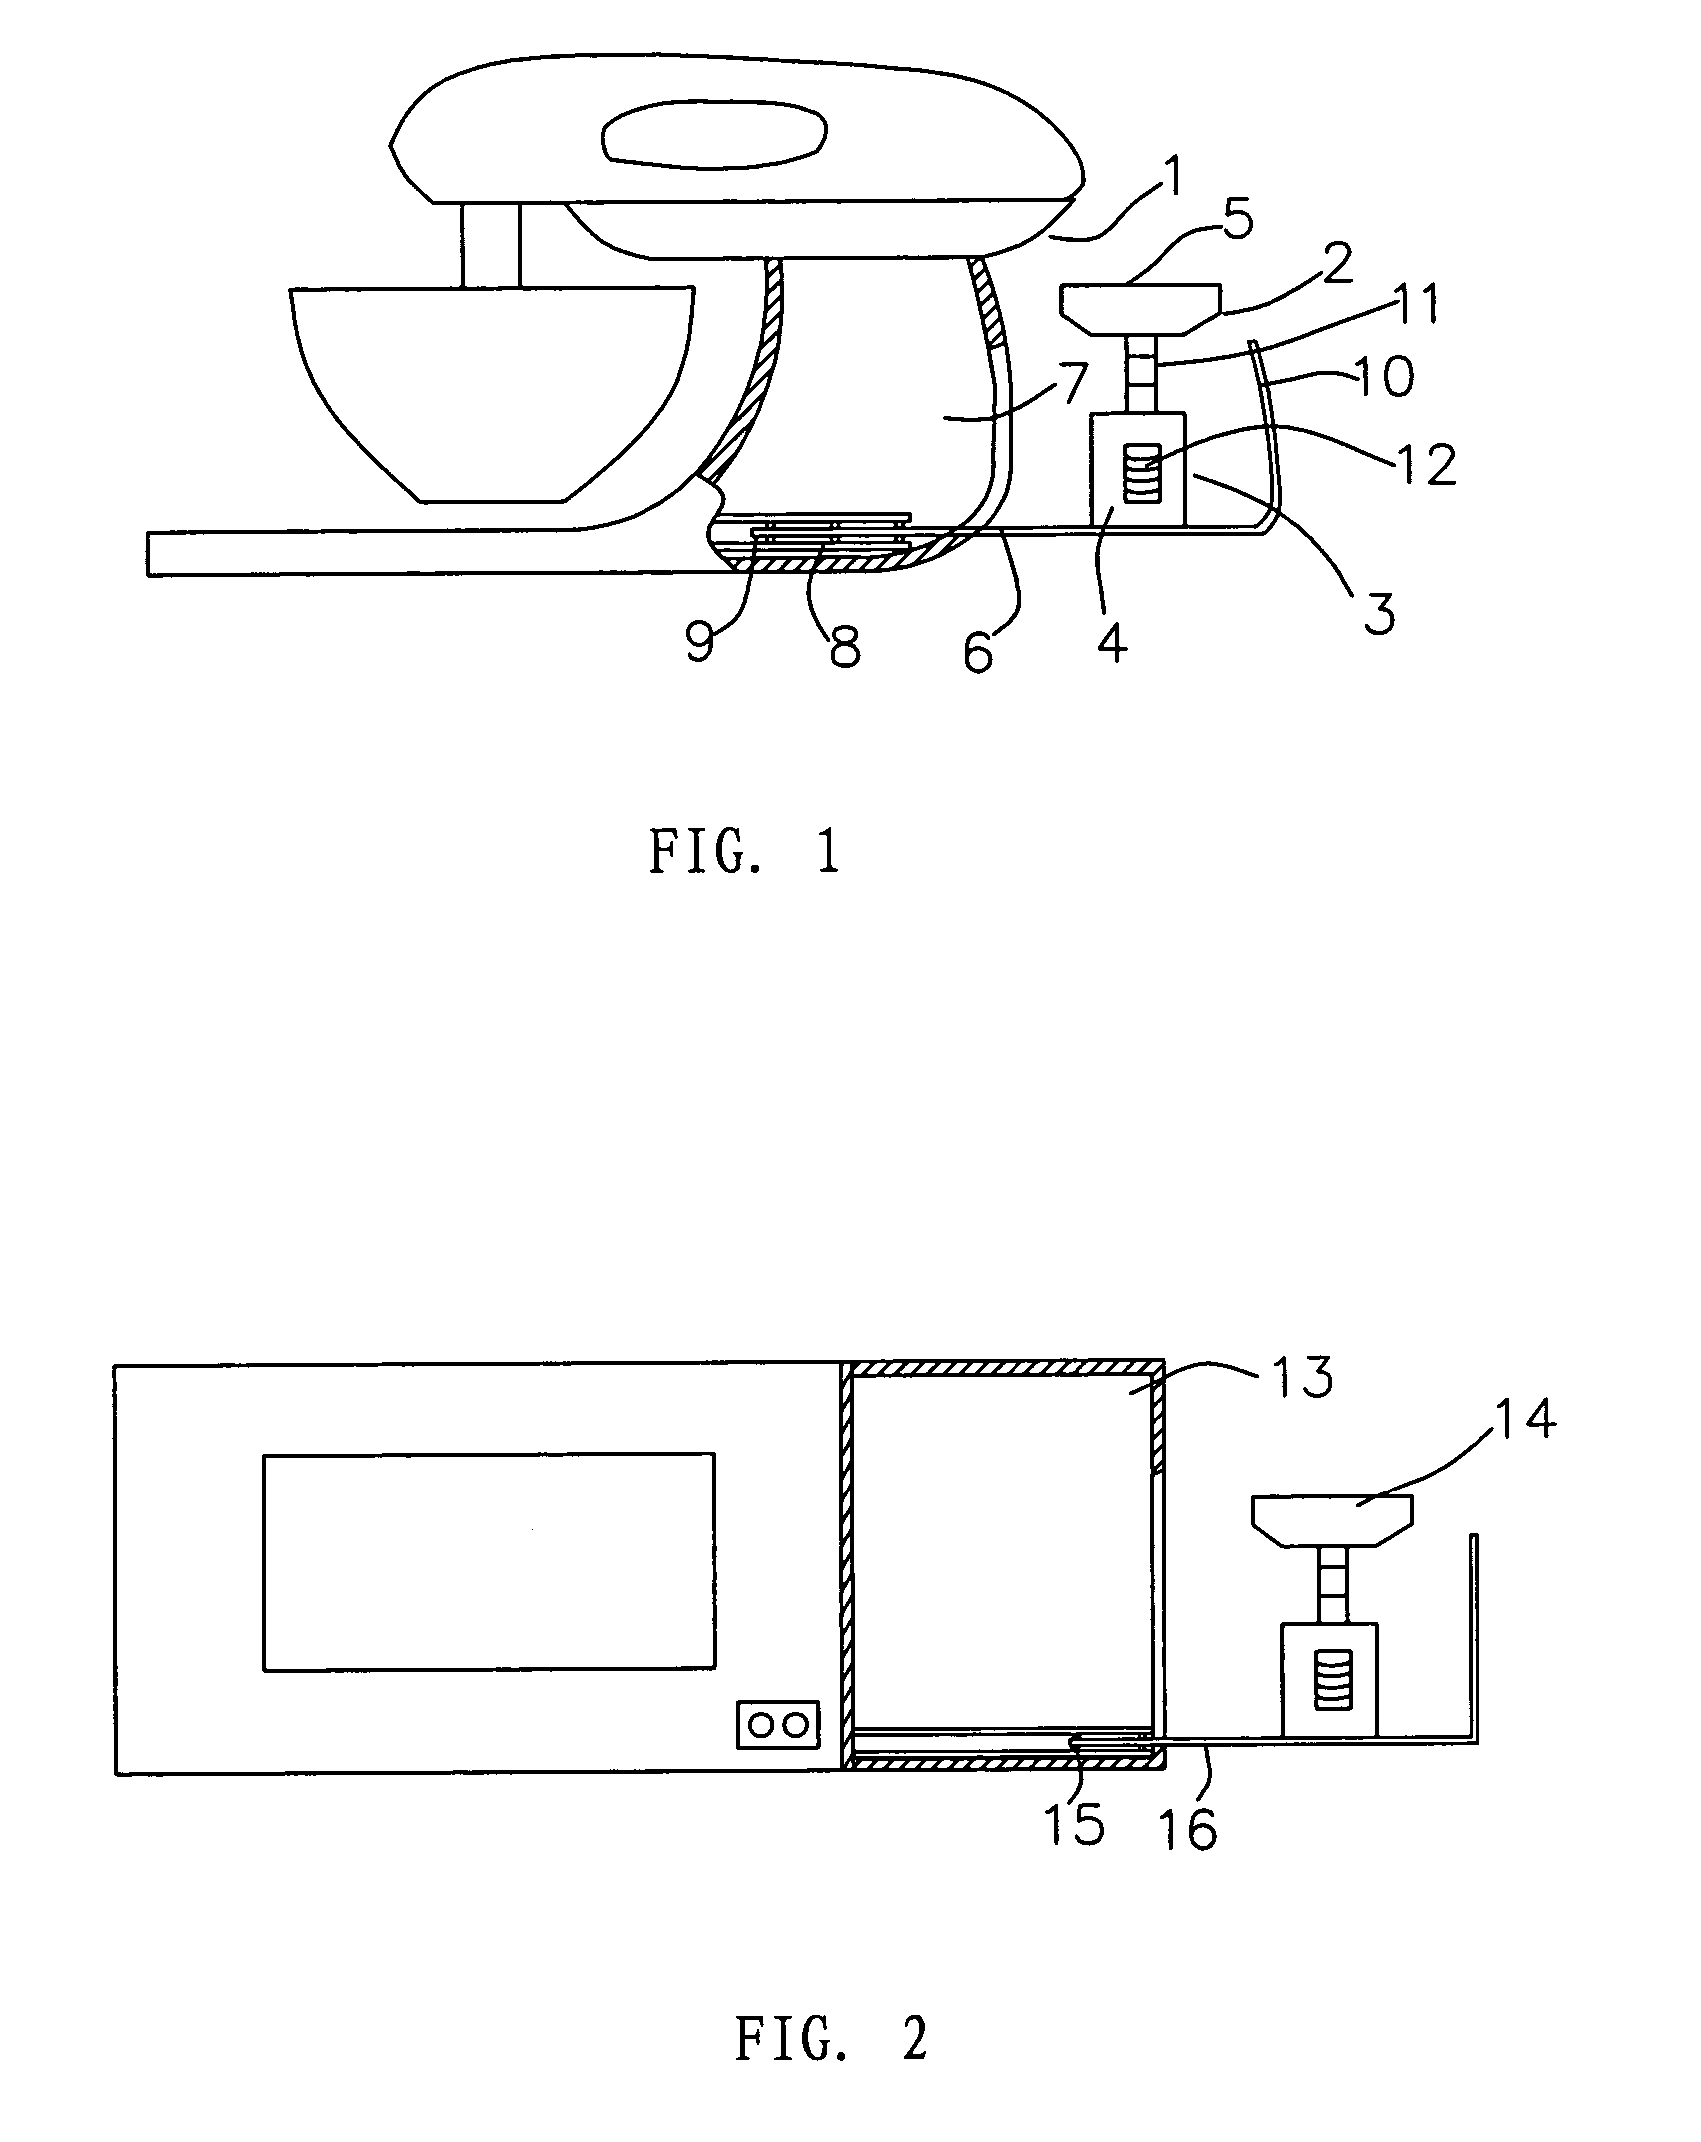 Food treating apparatus with a weighing scale